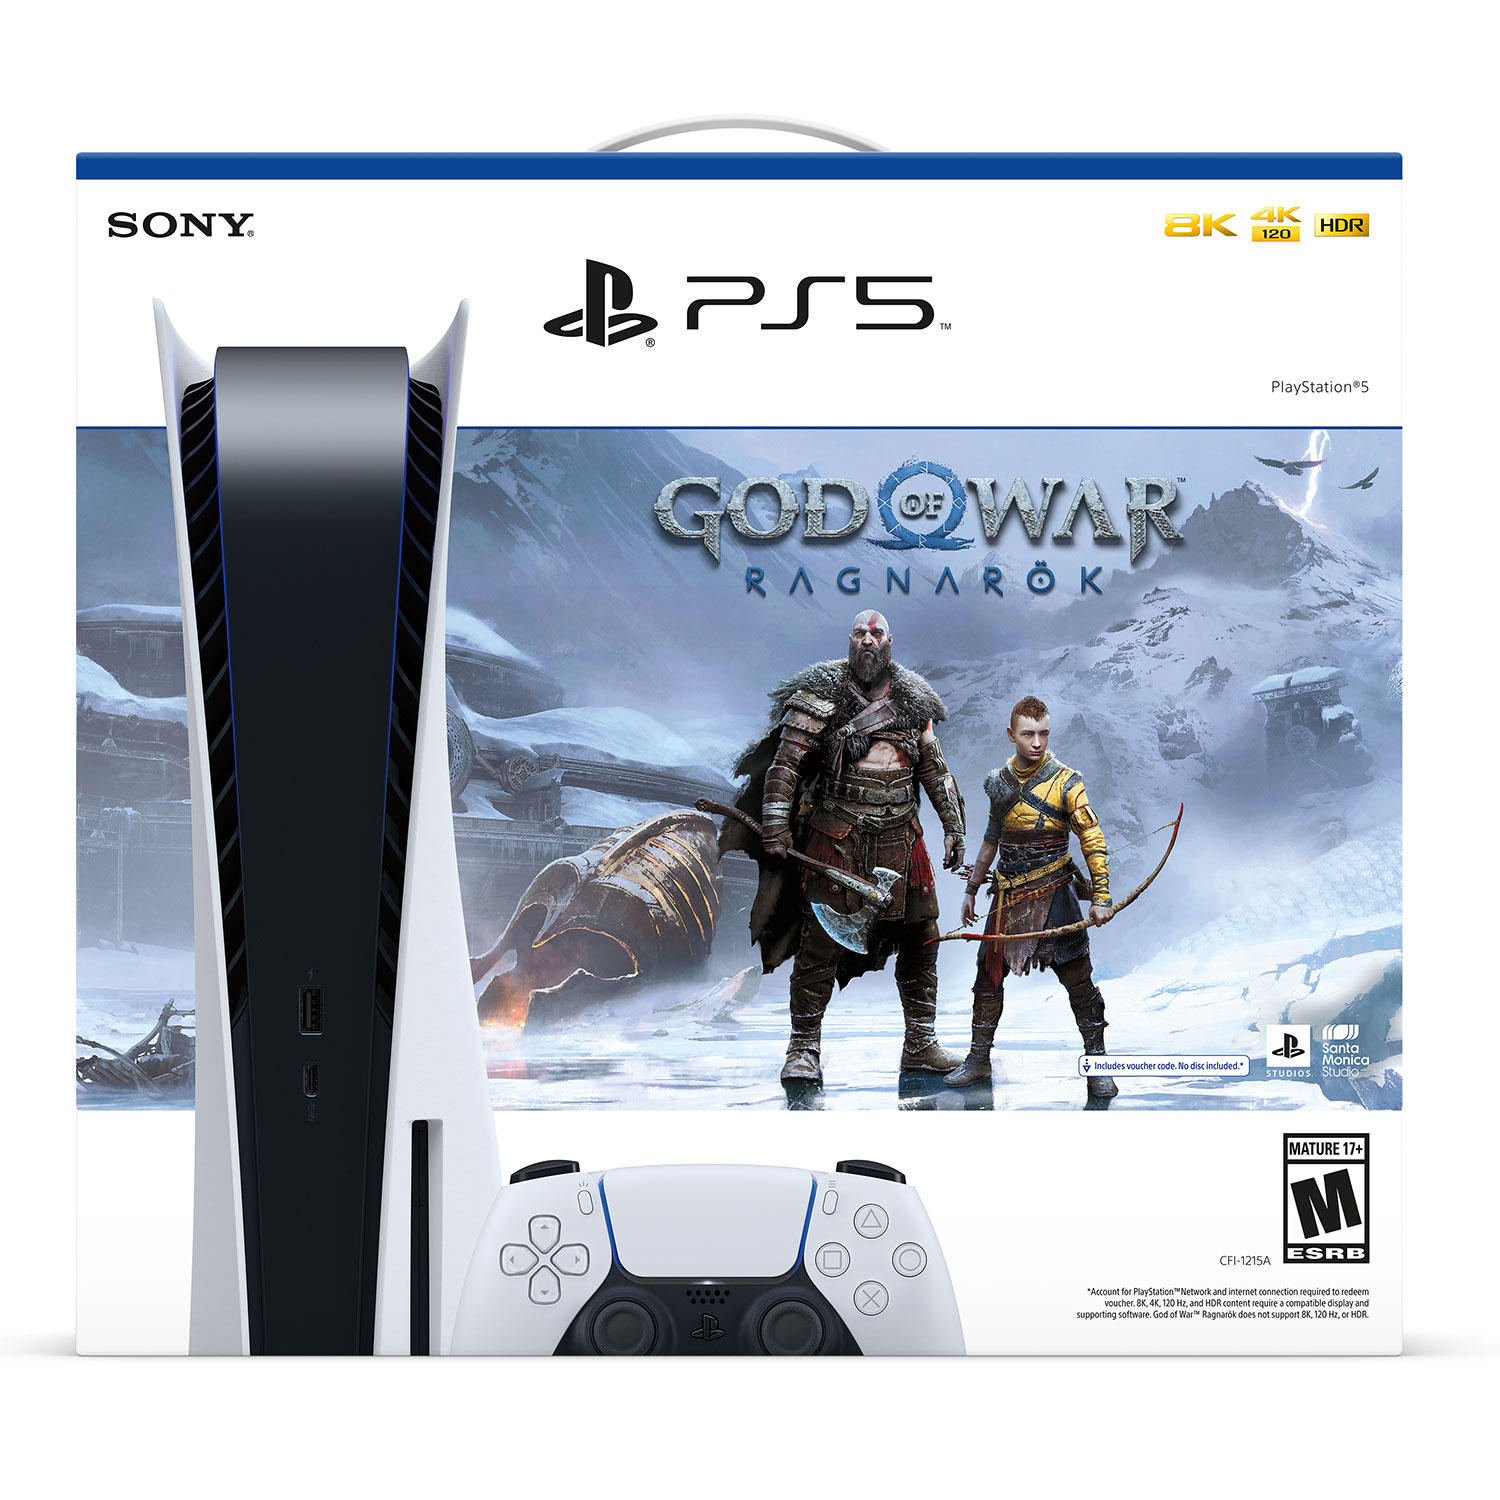 PS5 Bundle + God of War + Extra controller + Charge Station in stock at Sam's club $656.97